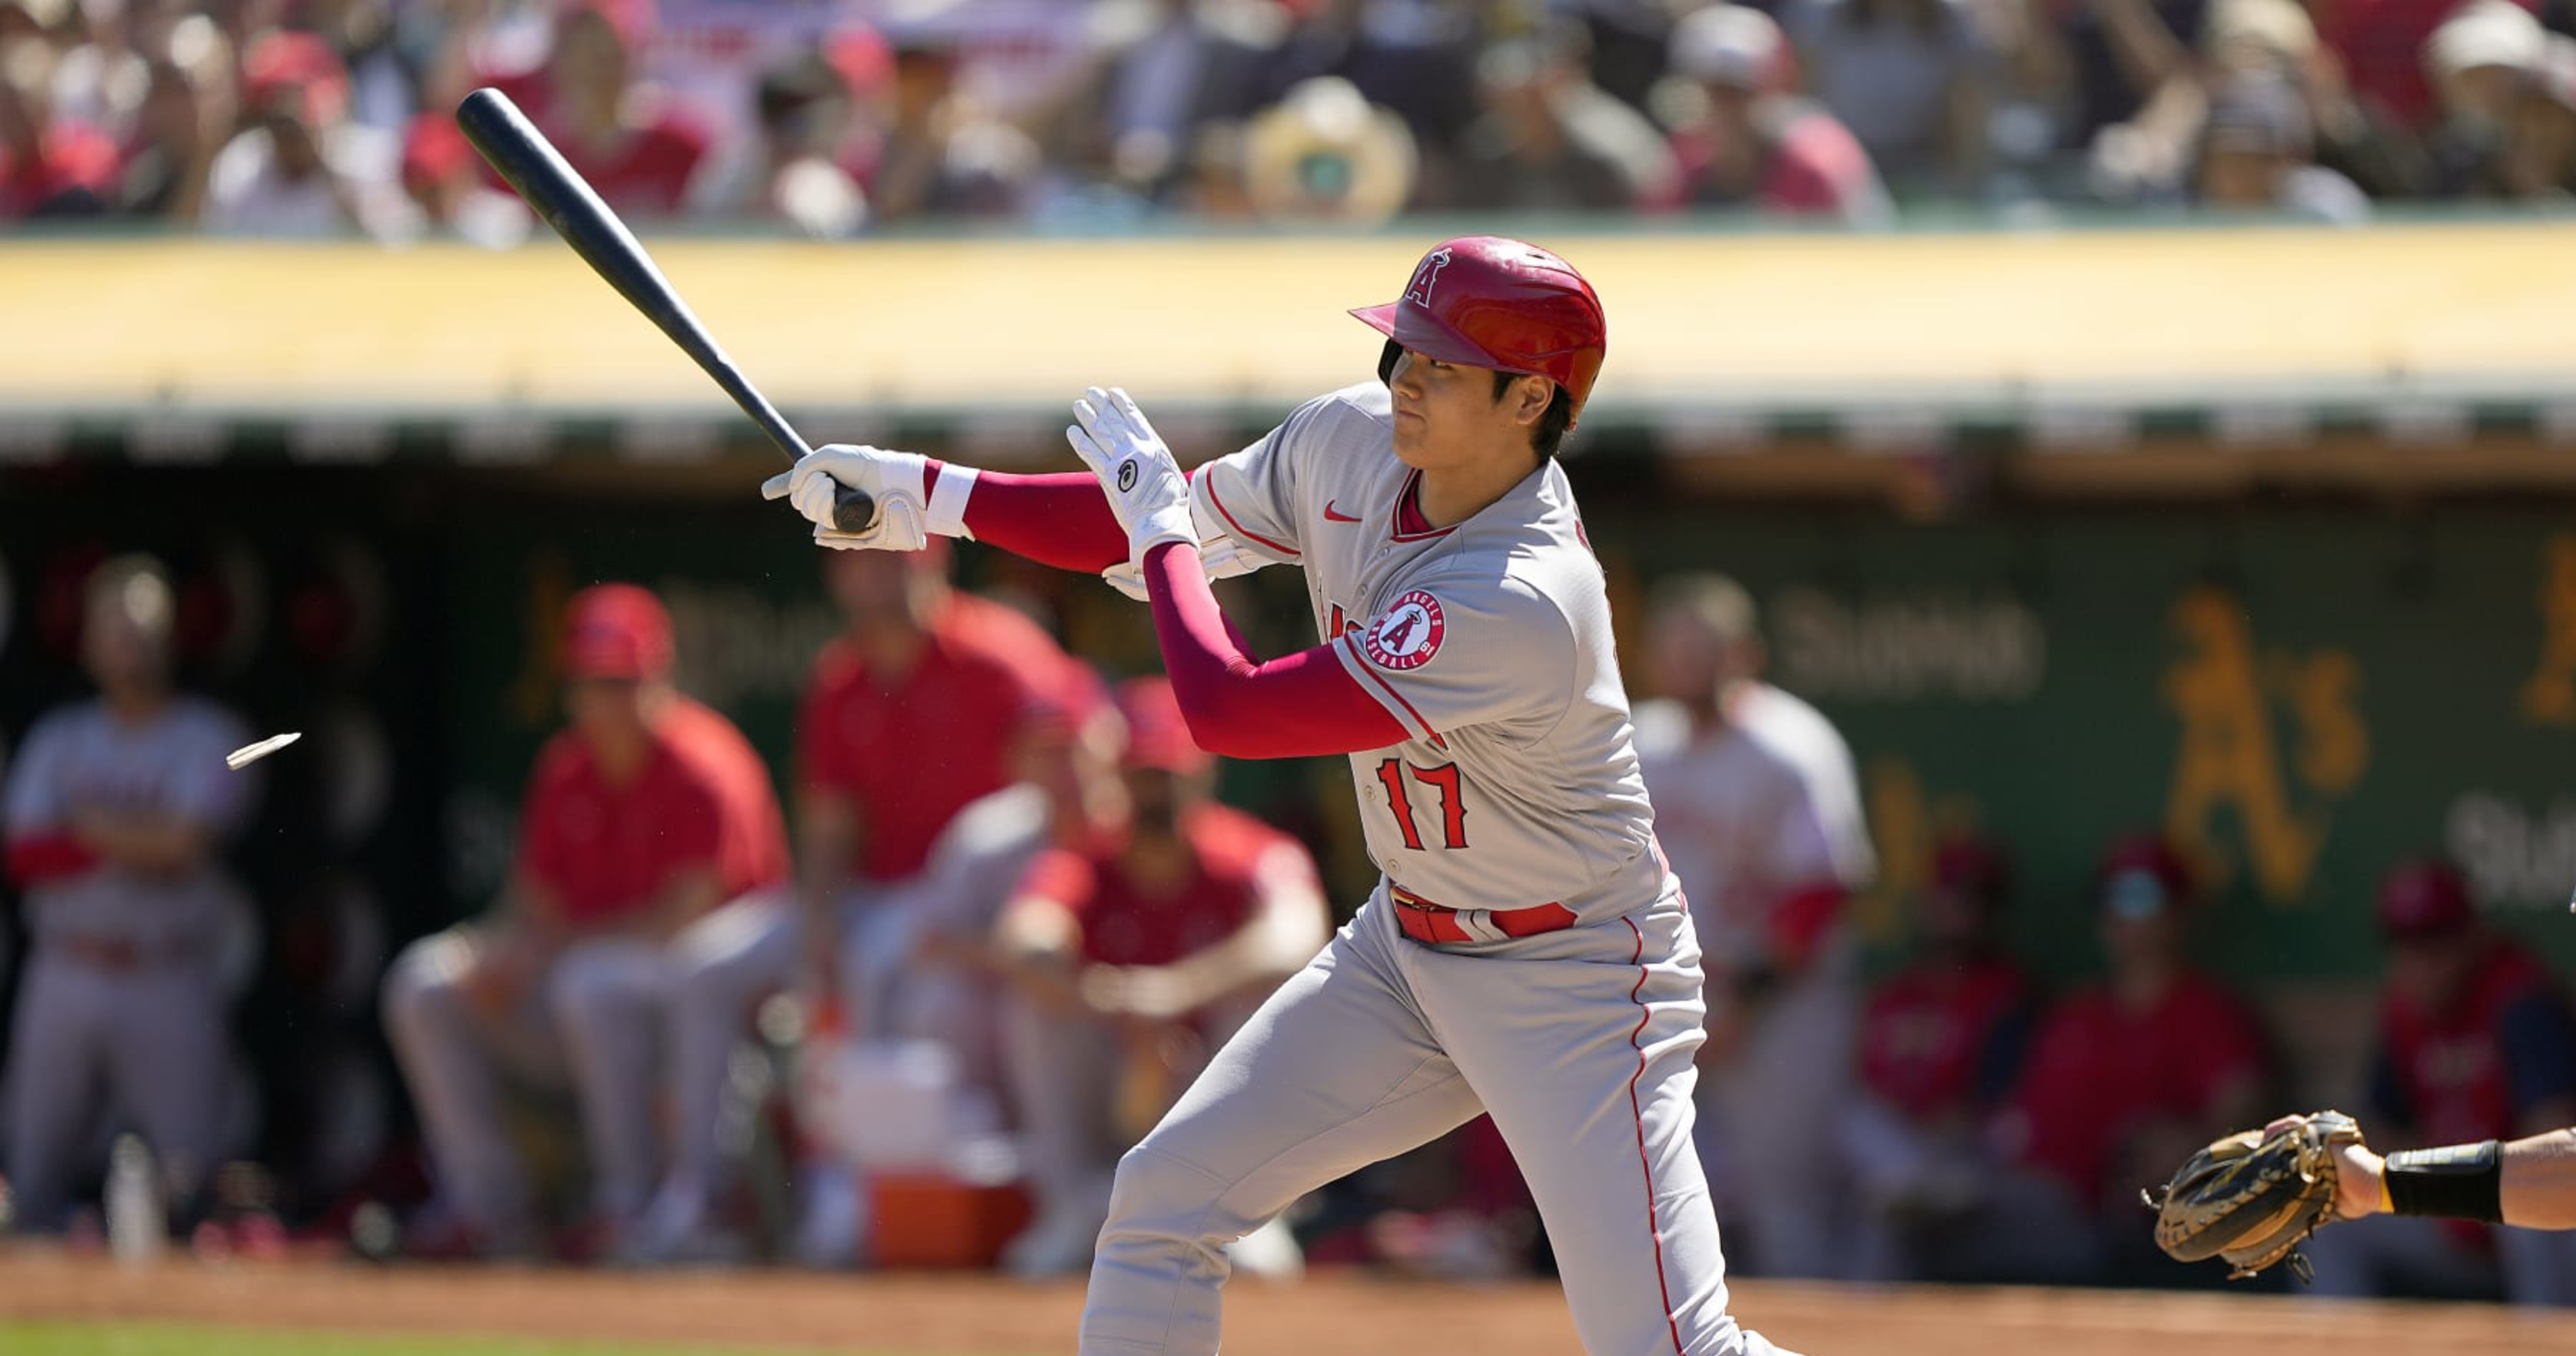 Shohei Ohtani headlines majors' soon-to-be free agents, and there's